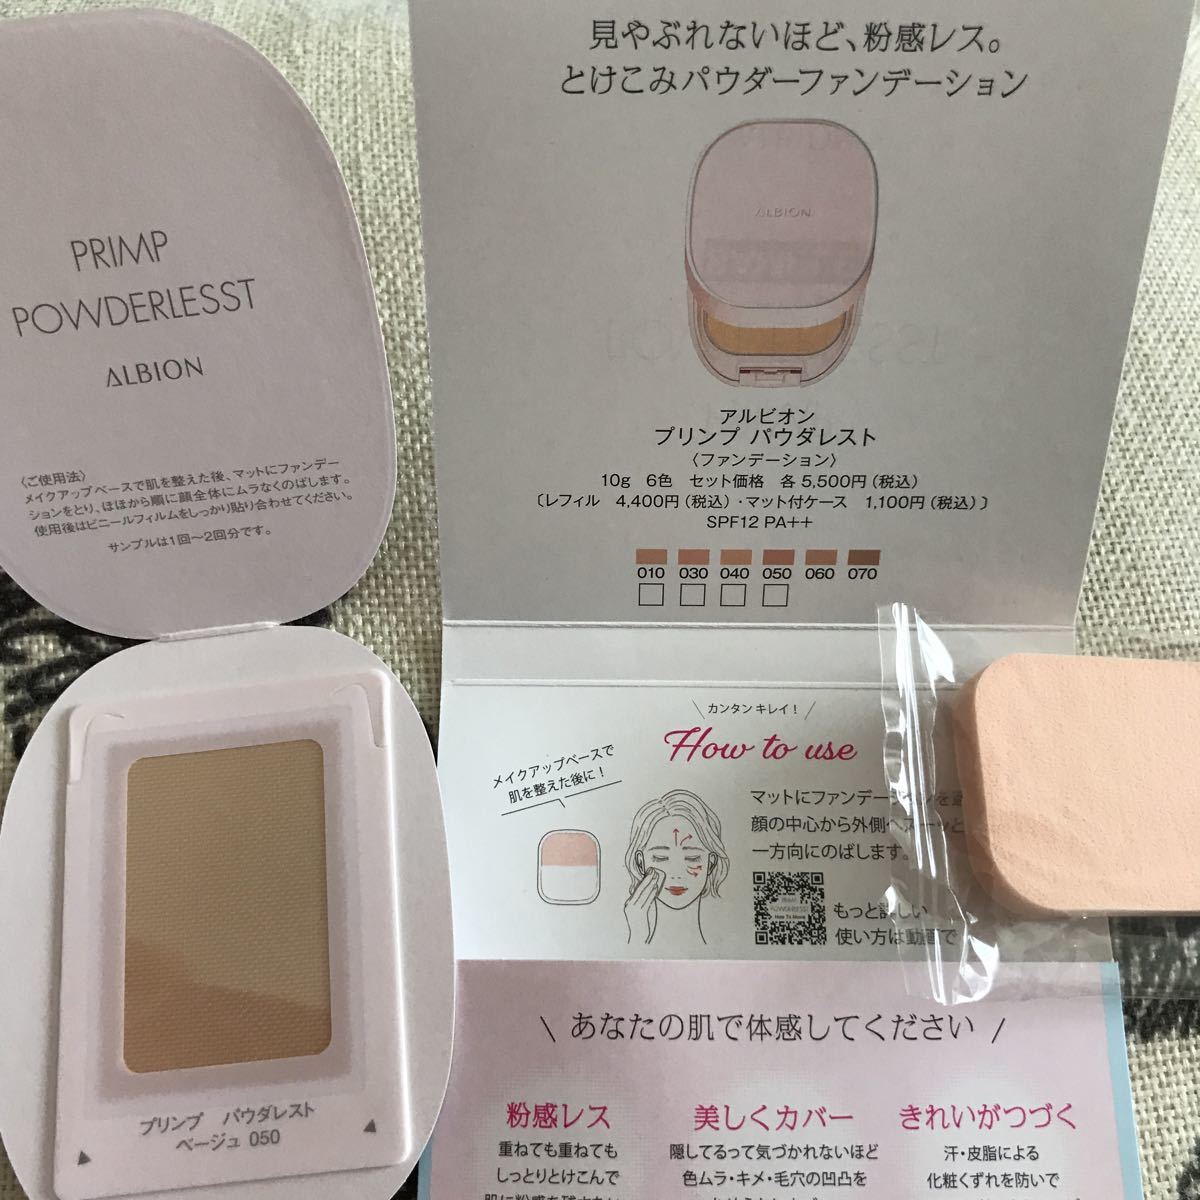  Albion pudding p powder rest foundation 050 number *ig varnish Io pop woshu2 piece free shipping 